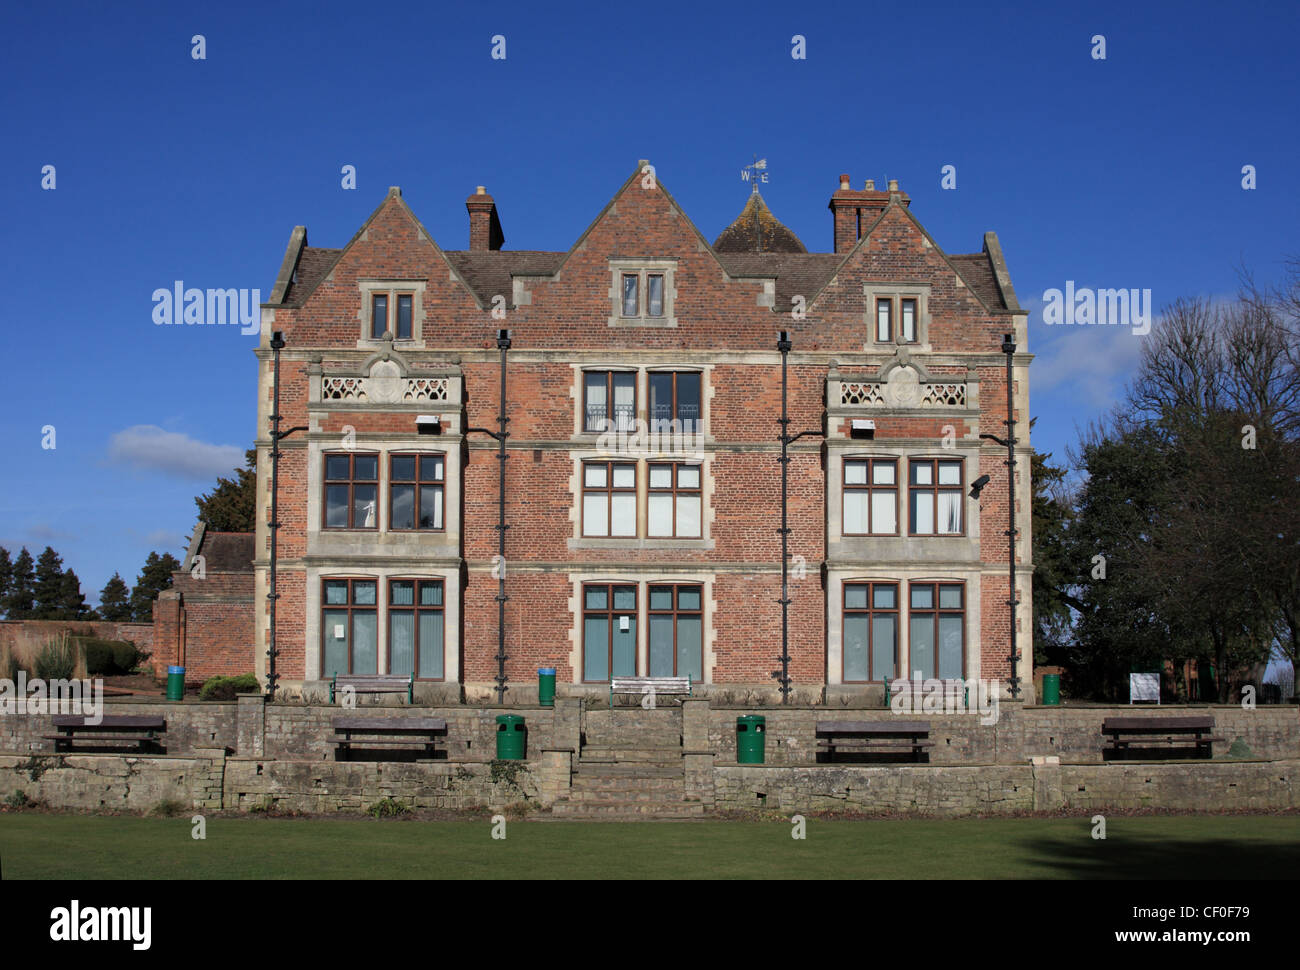 Wollescote hall a grade 2 listed building in the grounds of Stevens park, Wollescote, Stourbridge, West midlands. Stock Photo